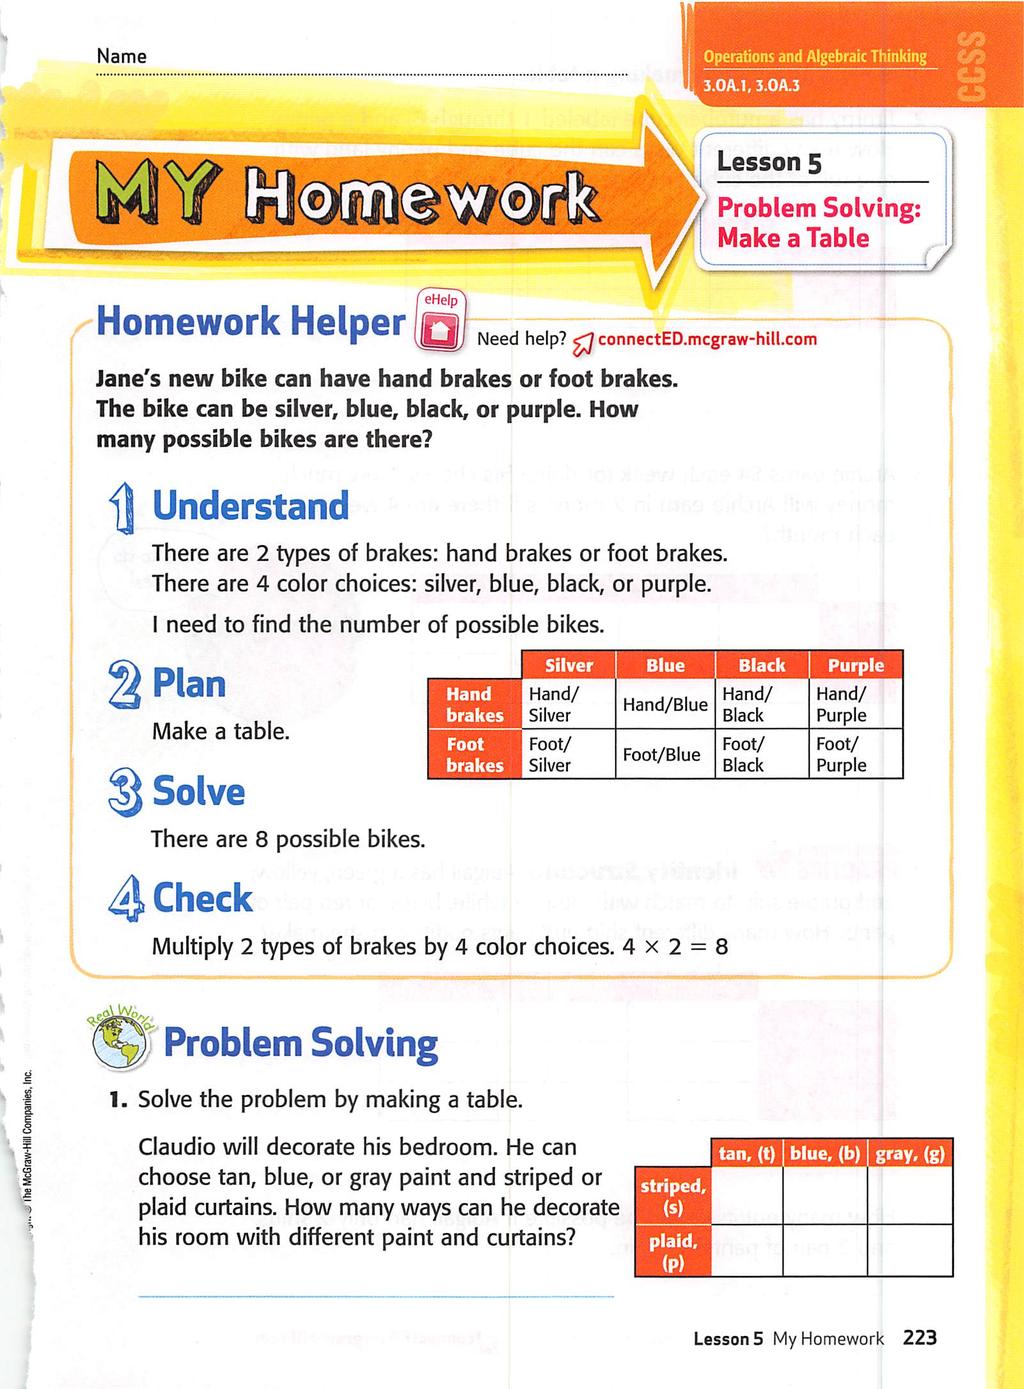 Name Operations and Algebraic Thinking T r t A * T A A T ; 3.0A.1. 3.0A.3 t a Lesson 5 Problem Solving: Make a Table 1 ehelp Homework Helper Q Need help? ^ connected.mcgraw-hil.